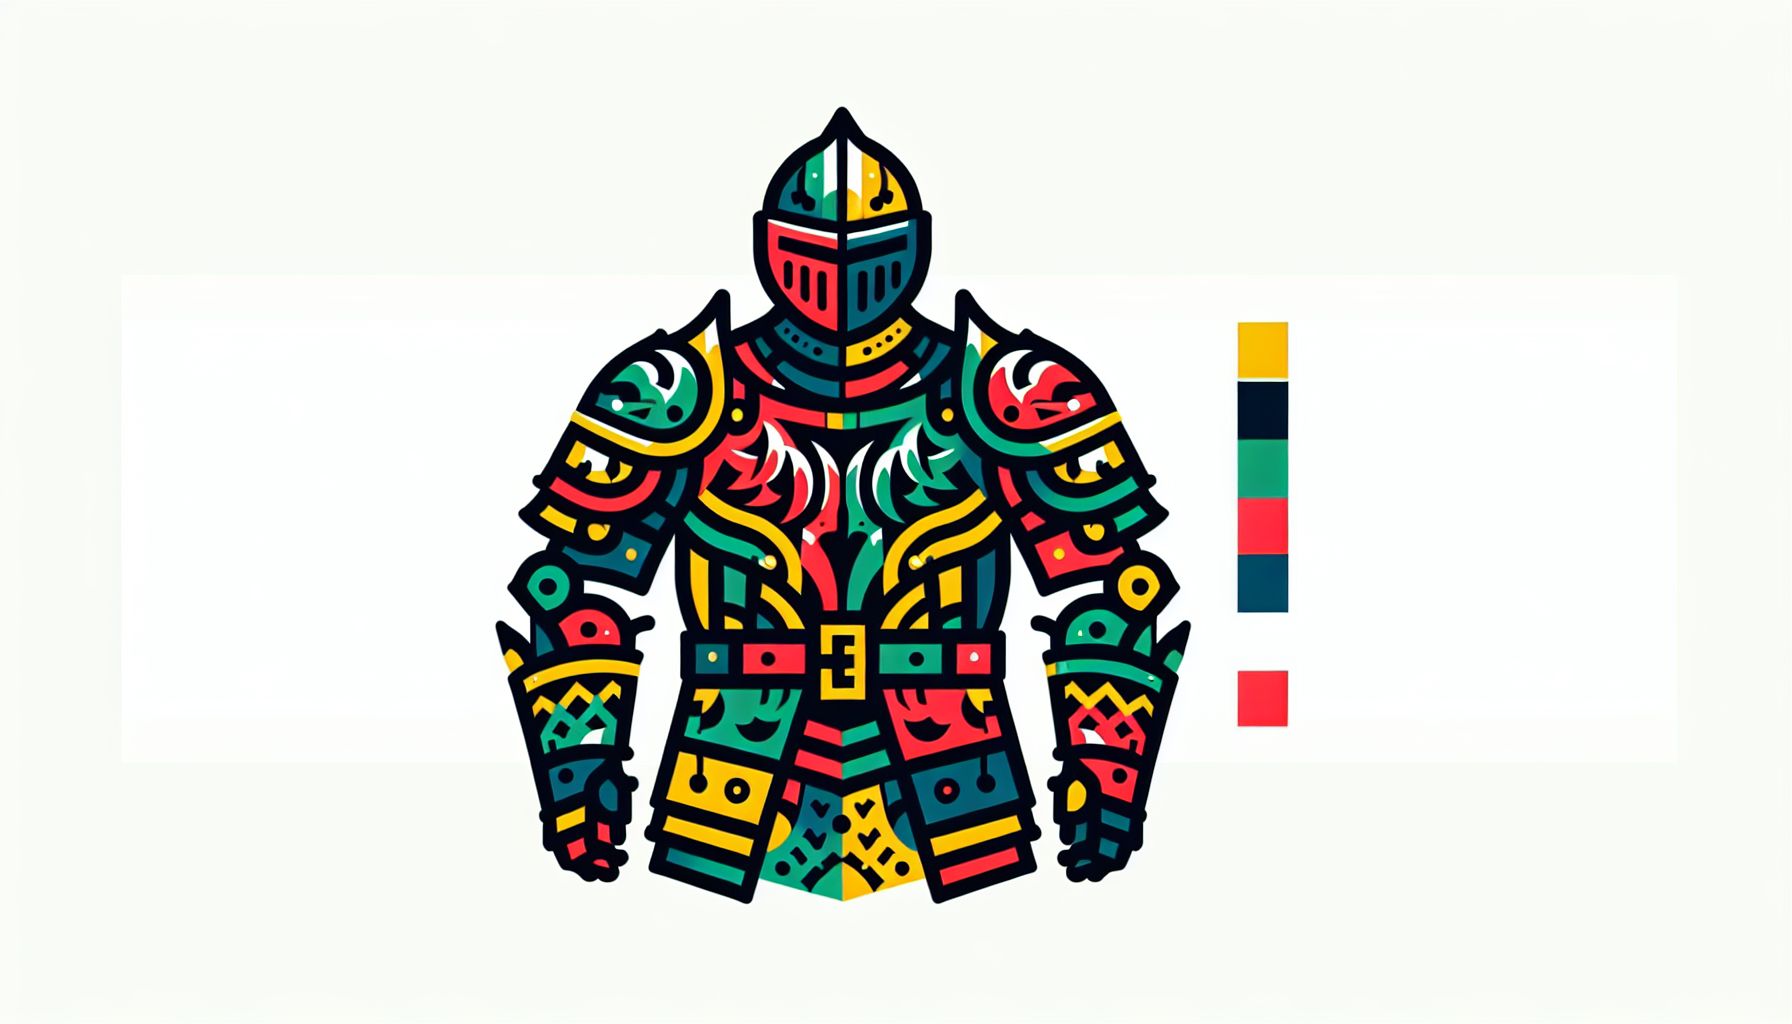 Armor in flat illustration style and white background, red #f47574, green #88c7a8, yellow #fcc44b, and blue #645bc8 colors.